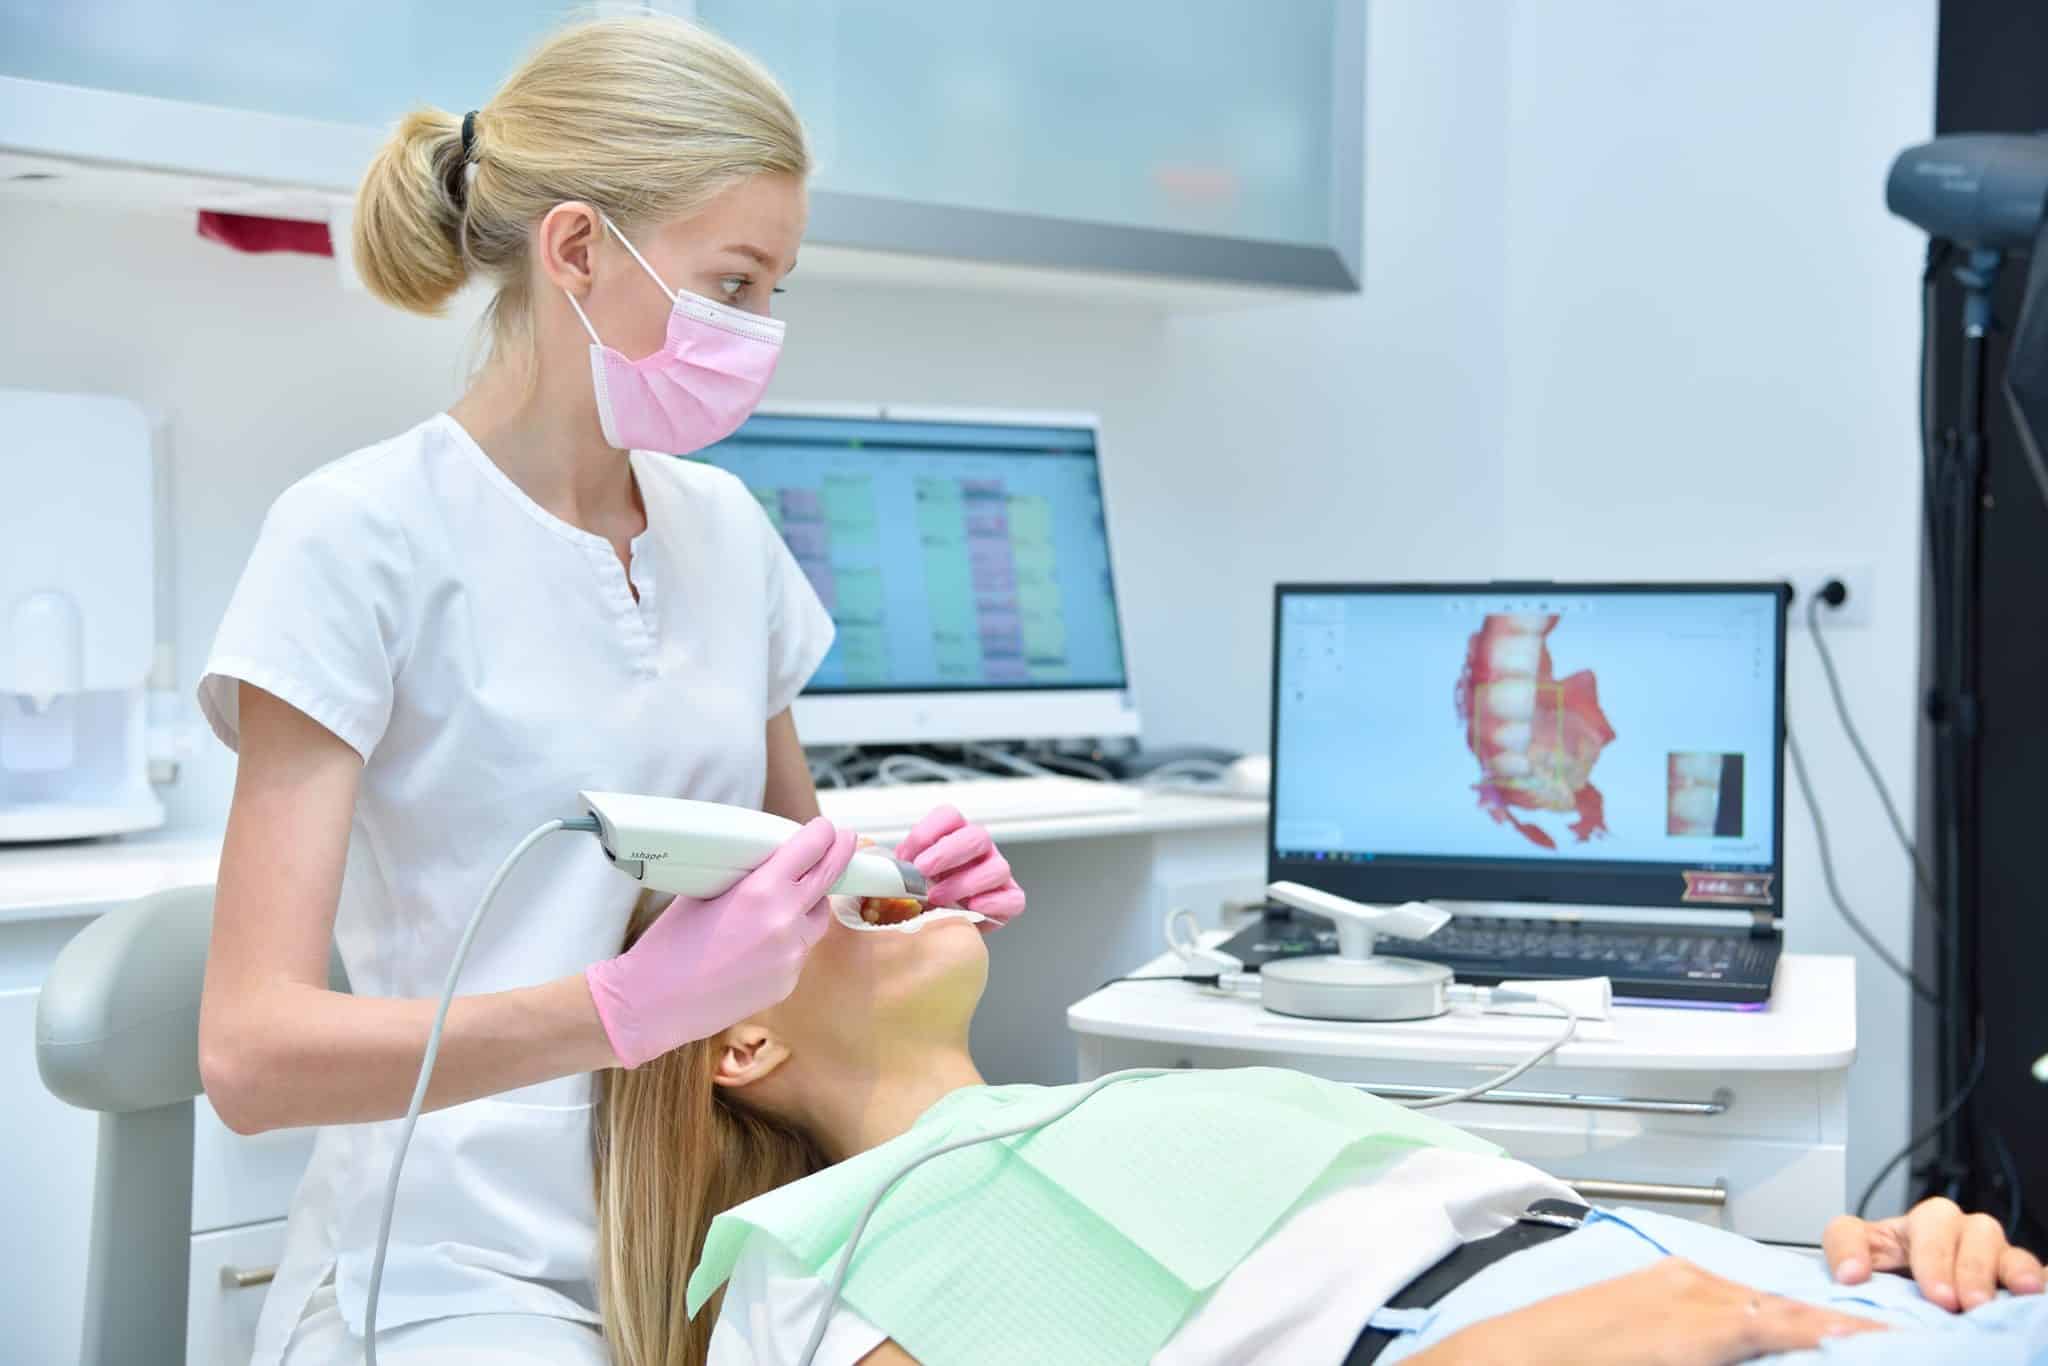 Orthodontist scanning patient with a dental intraoral scanner